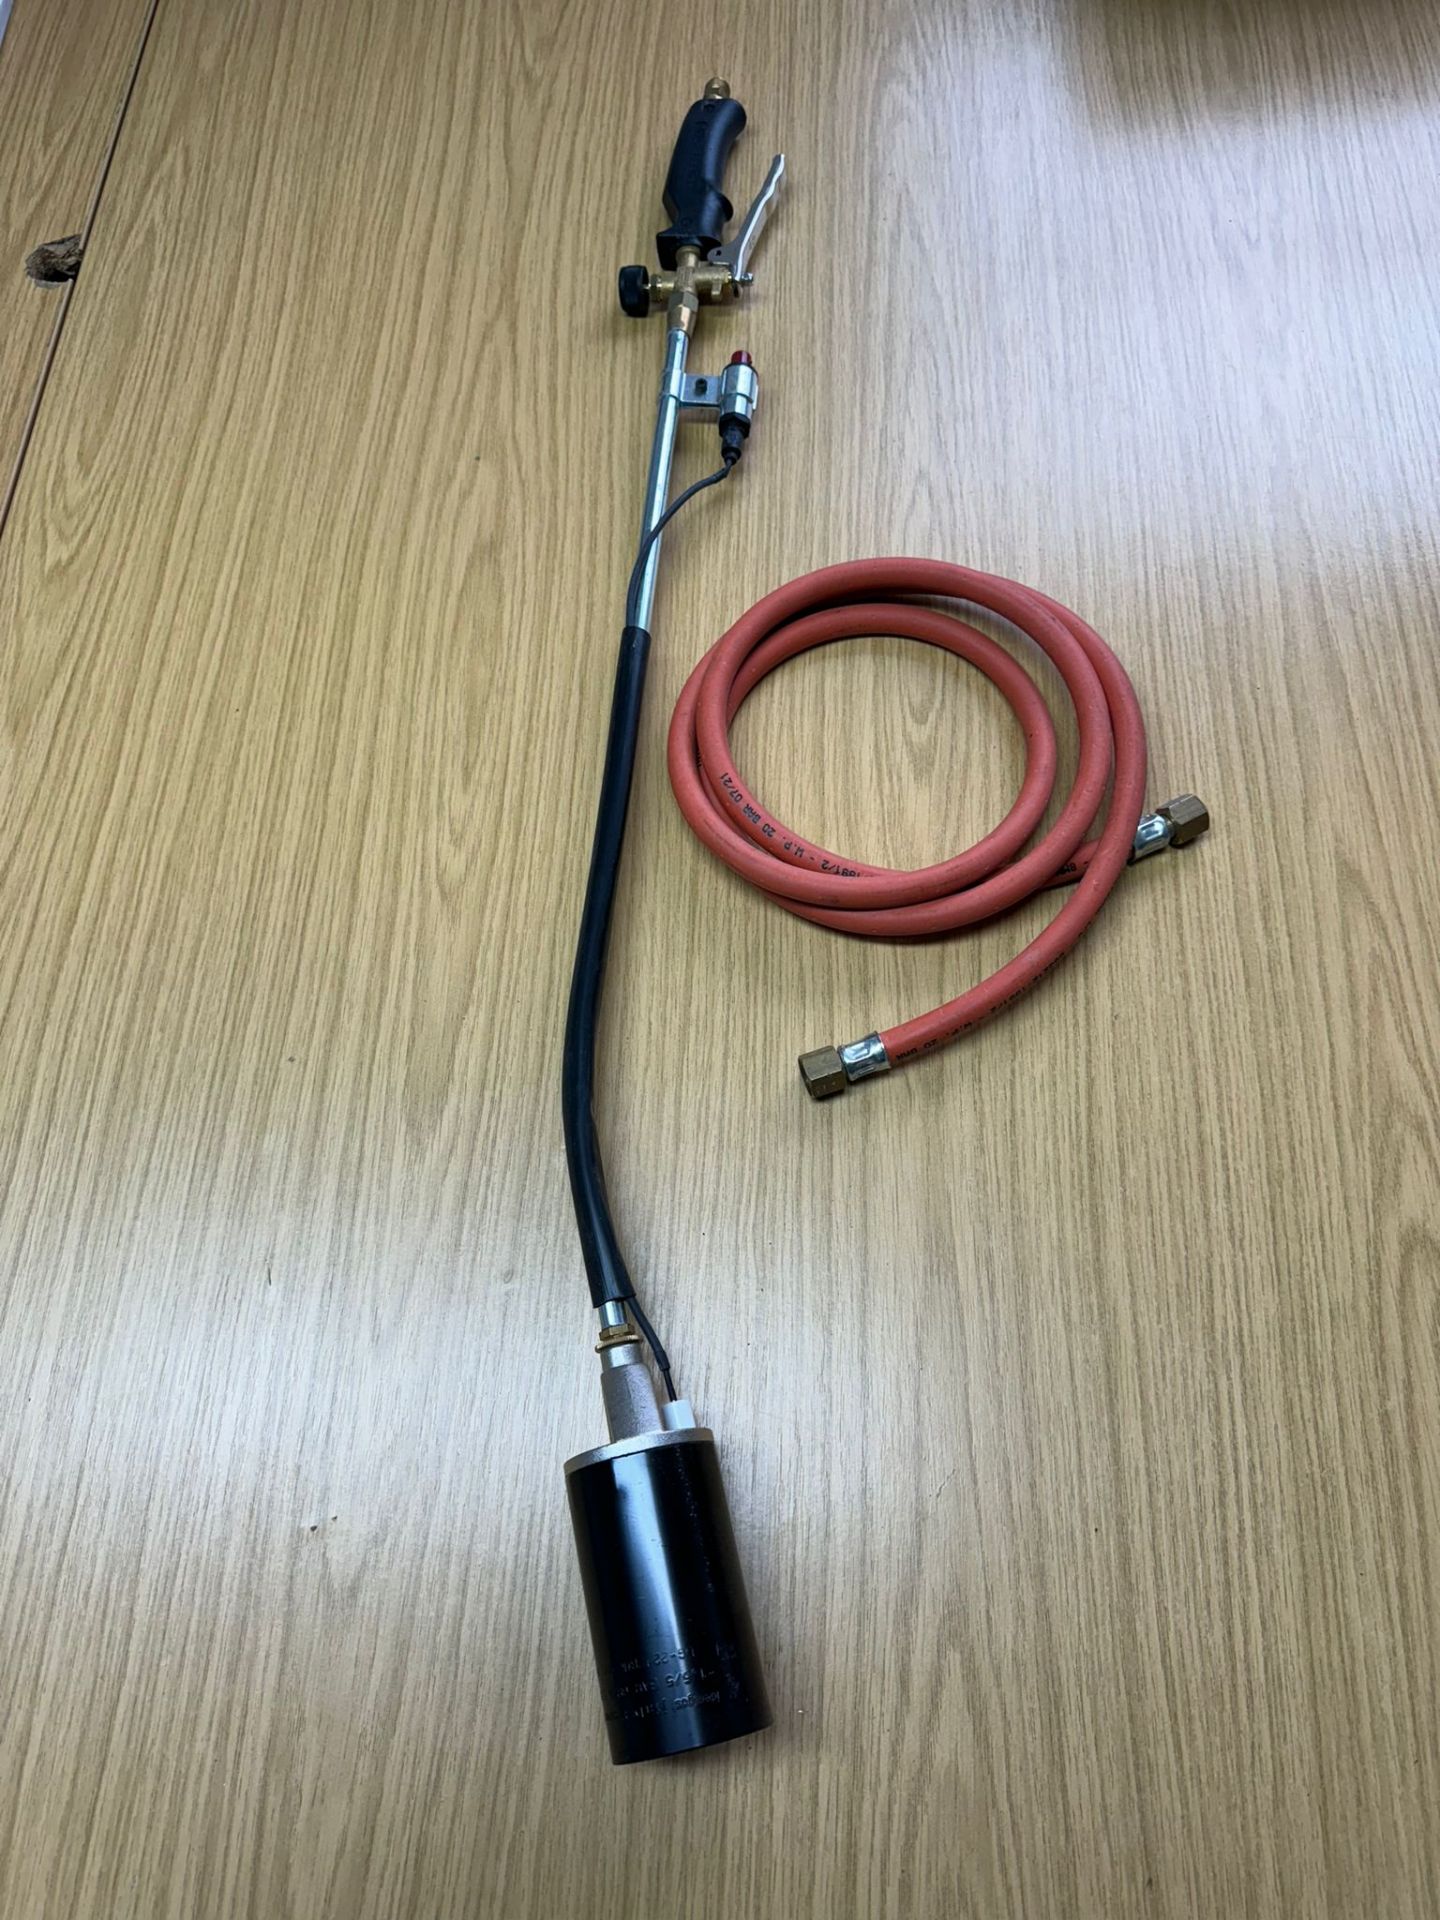 Brand new roofing torch